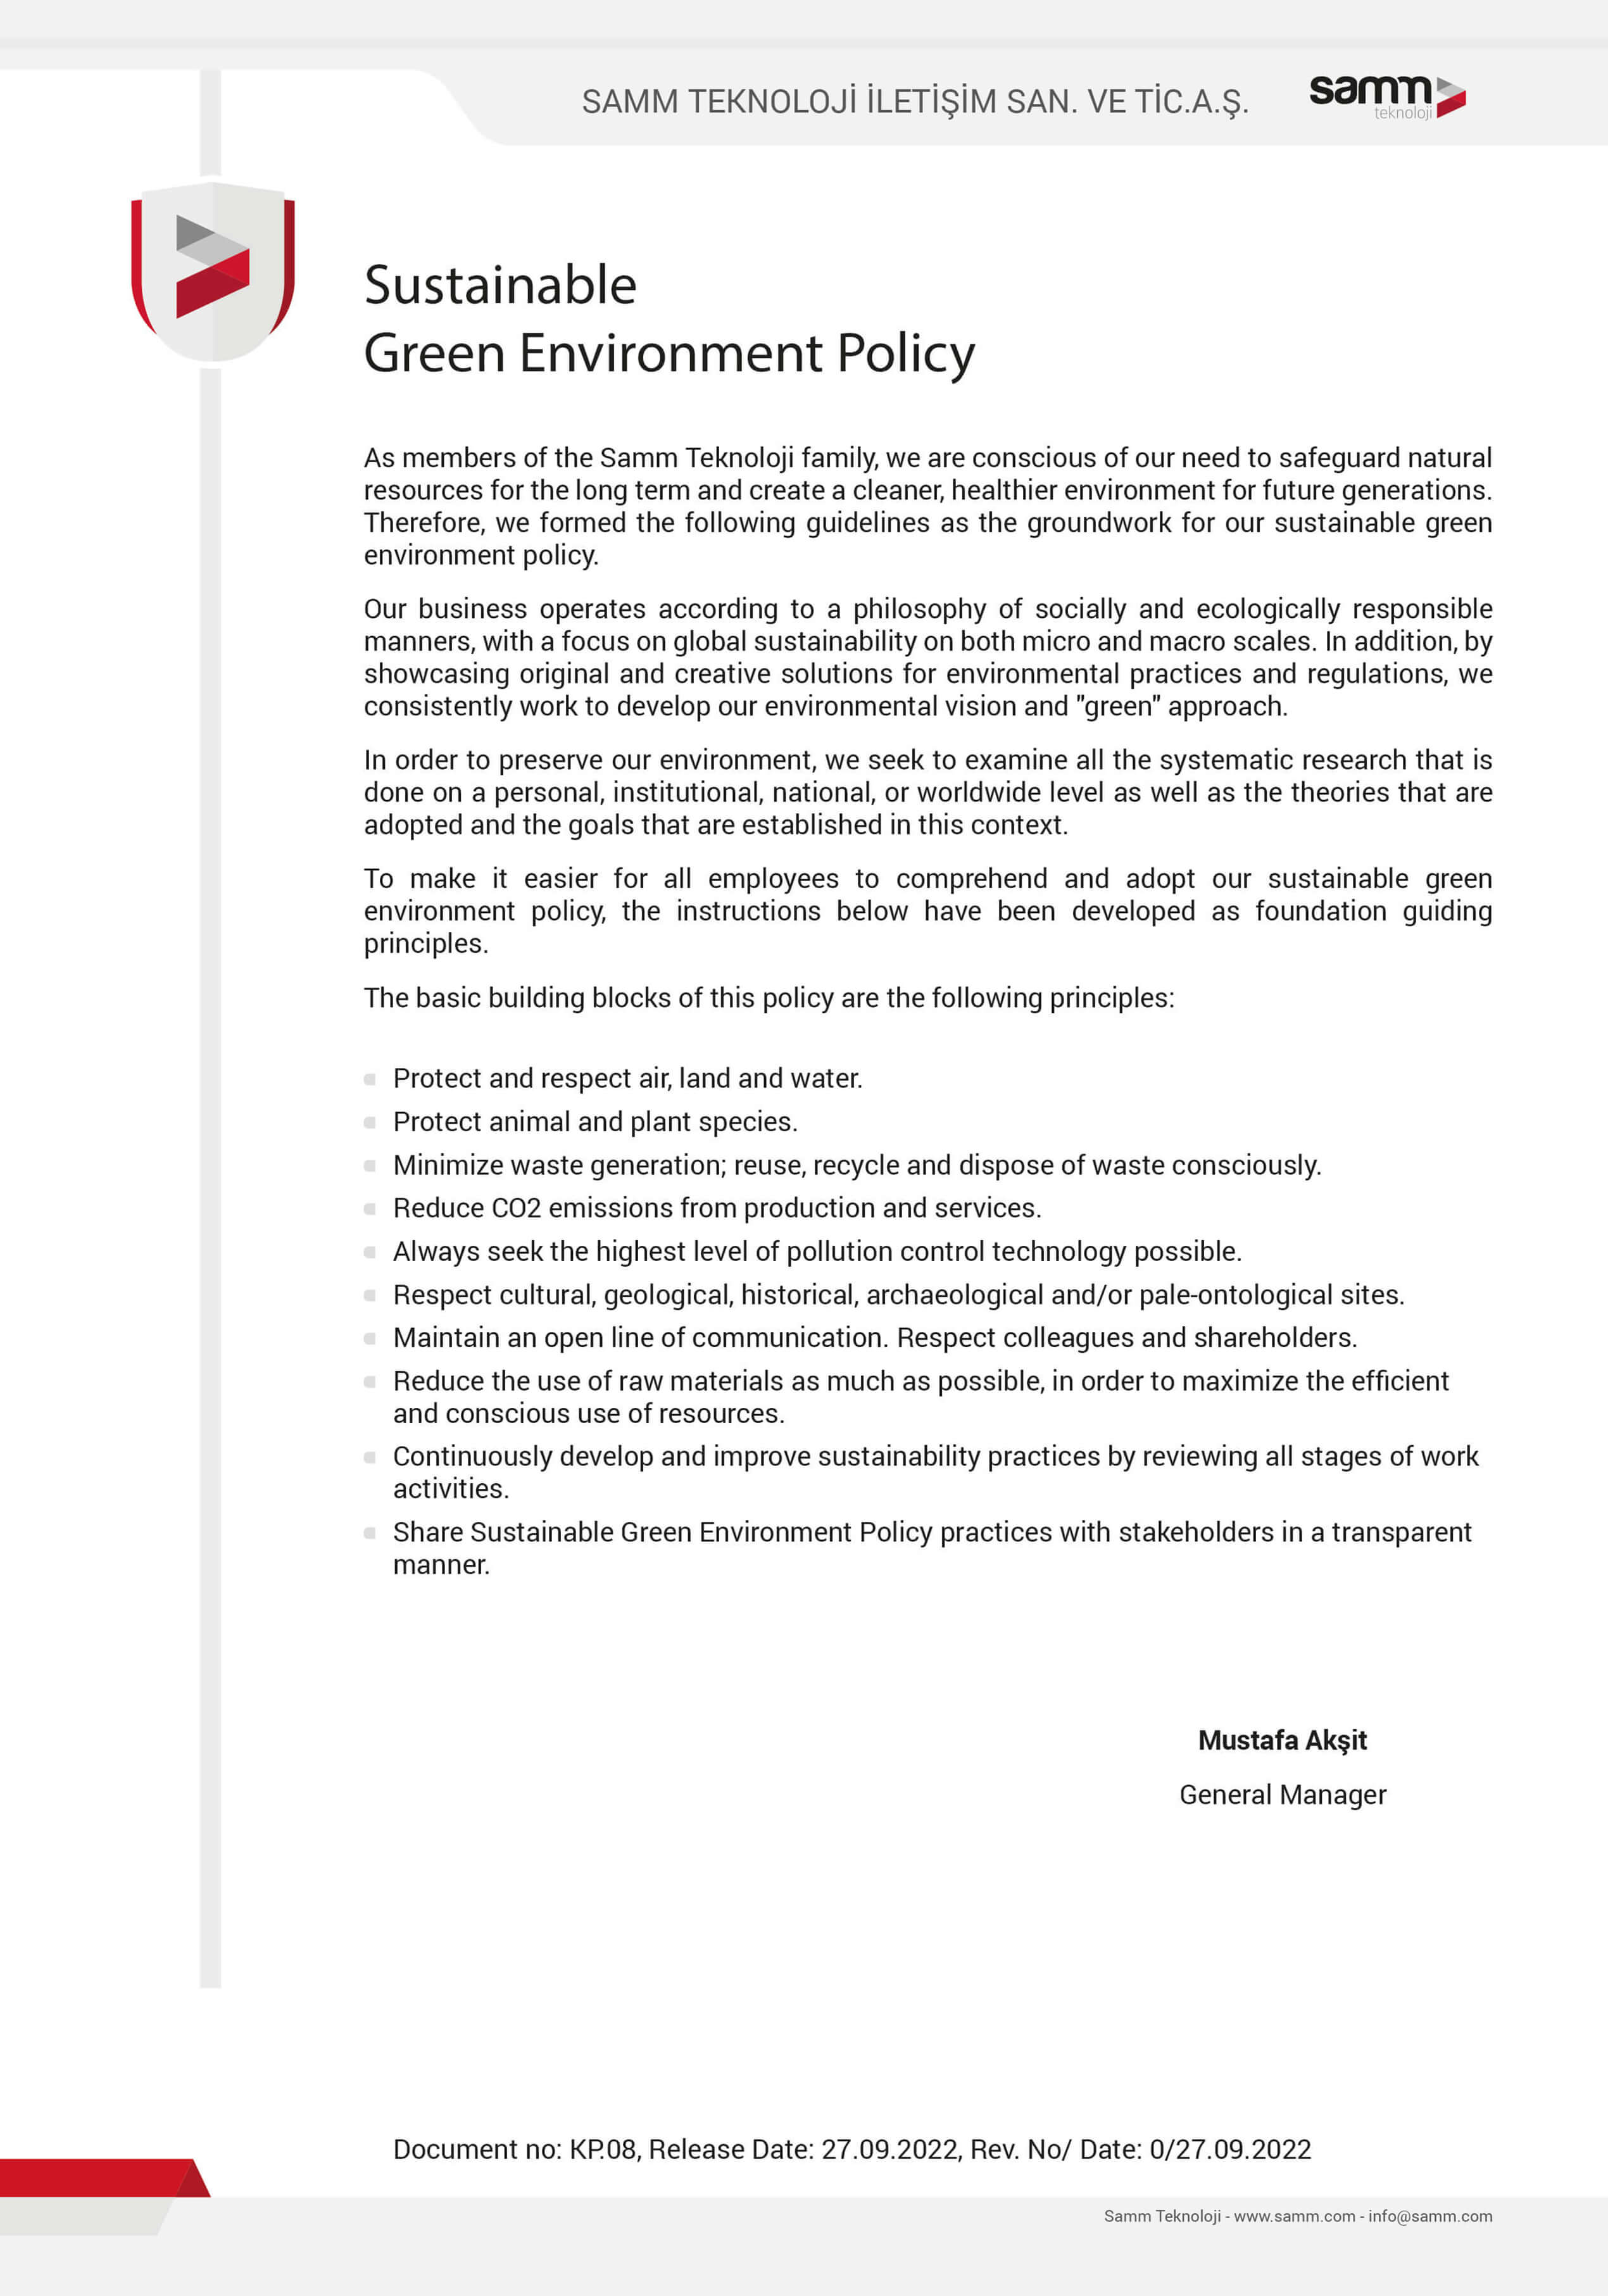 Sustainable Green Environment Policy